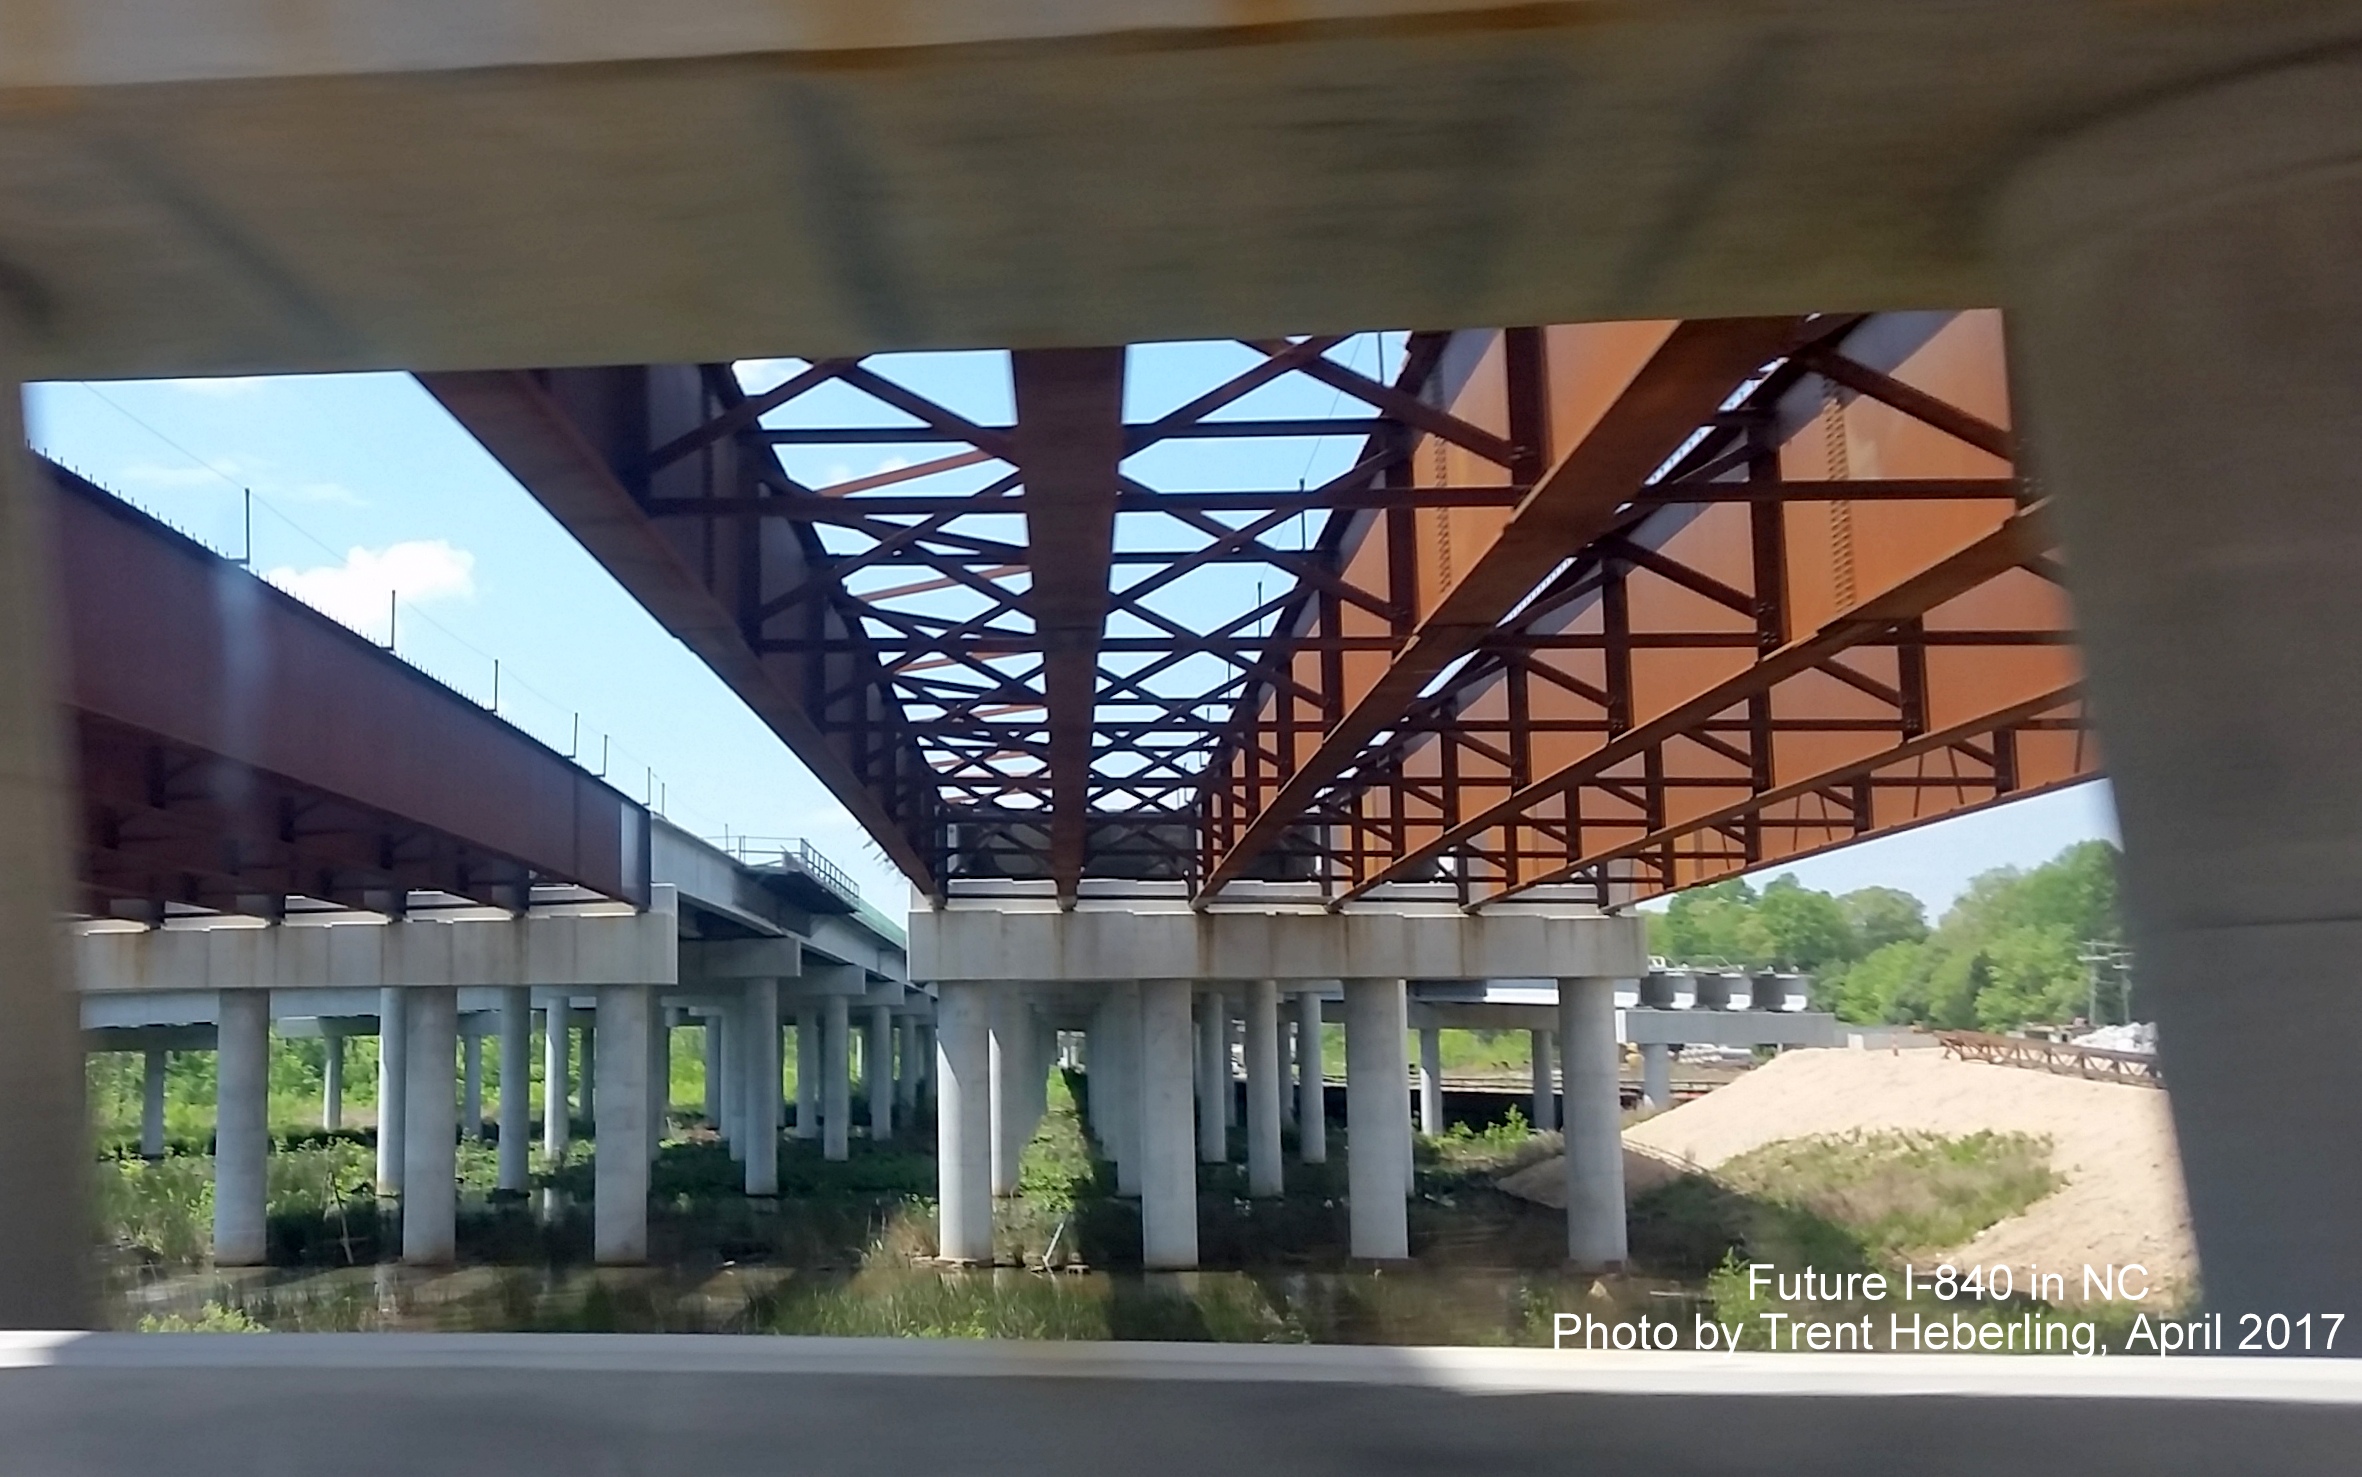 Image of view from US 220/Battleground Ave of Future I-840 elevated structure in Greensboro, by Trent Heberling